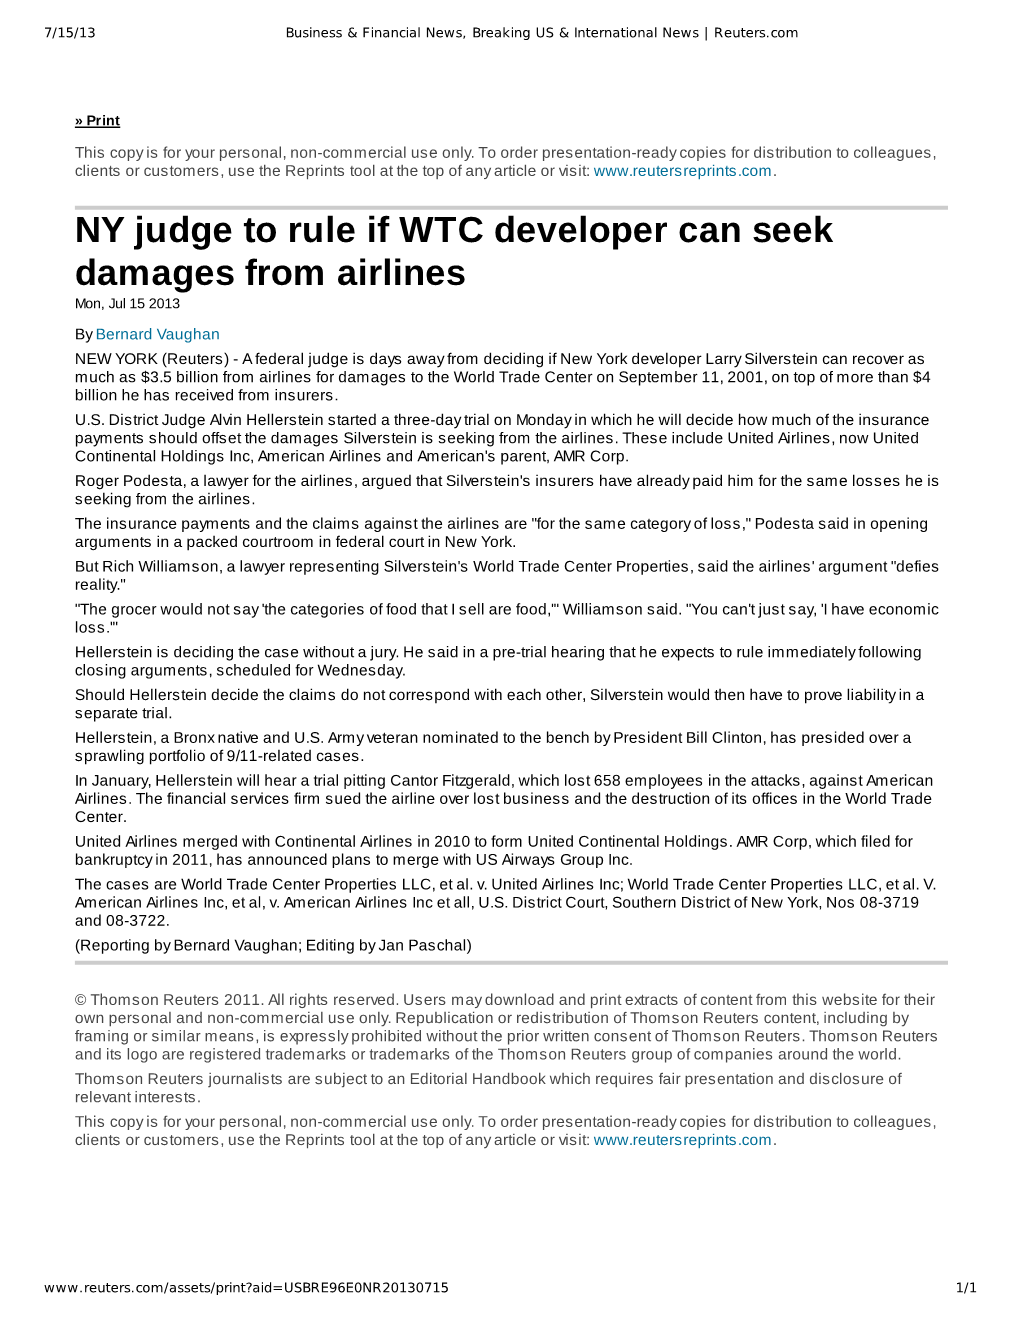 NY Judge to Rule If WTC Developer Can Seek Damages from Airlines Mon, Jul 15 2013